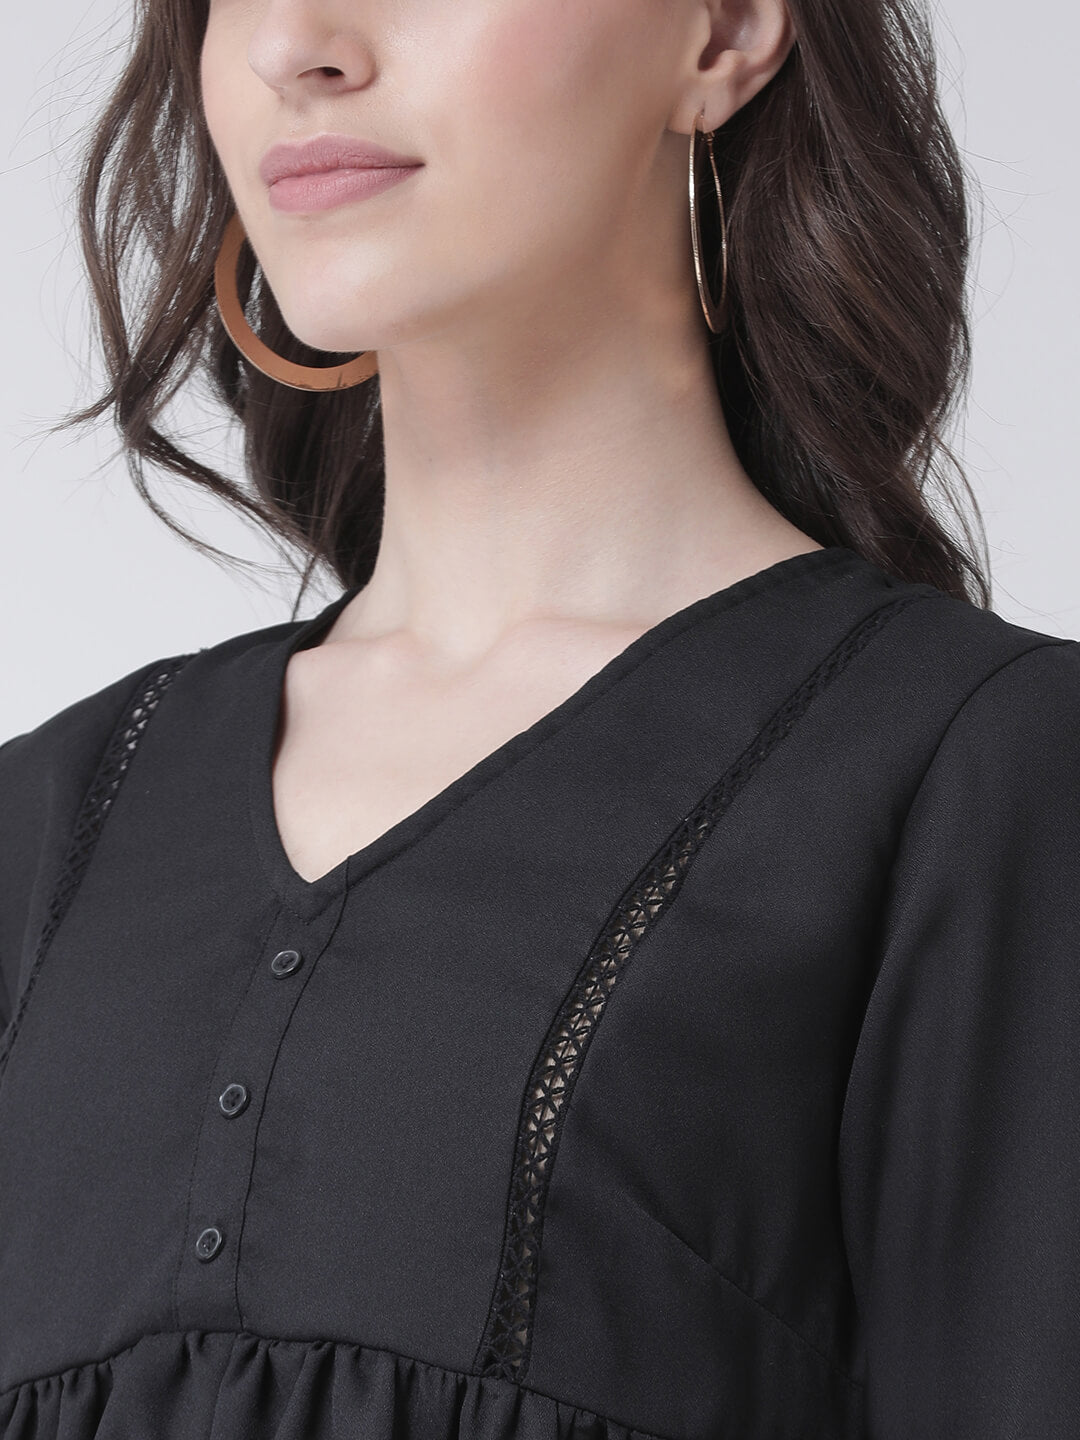 Women'S Floral Woven Top With Lace Detail On The Yoke And Sleeve, Has A V Neck, Bell Sleeves